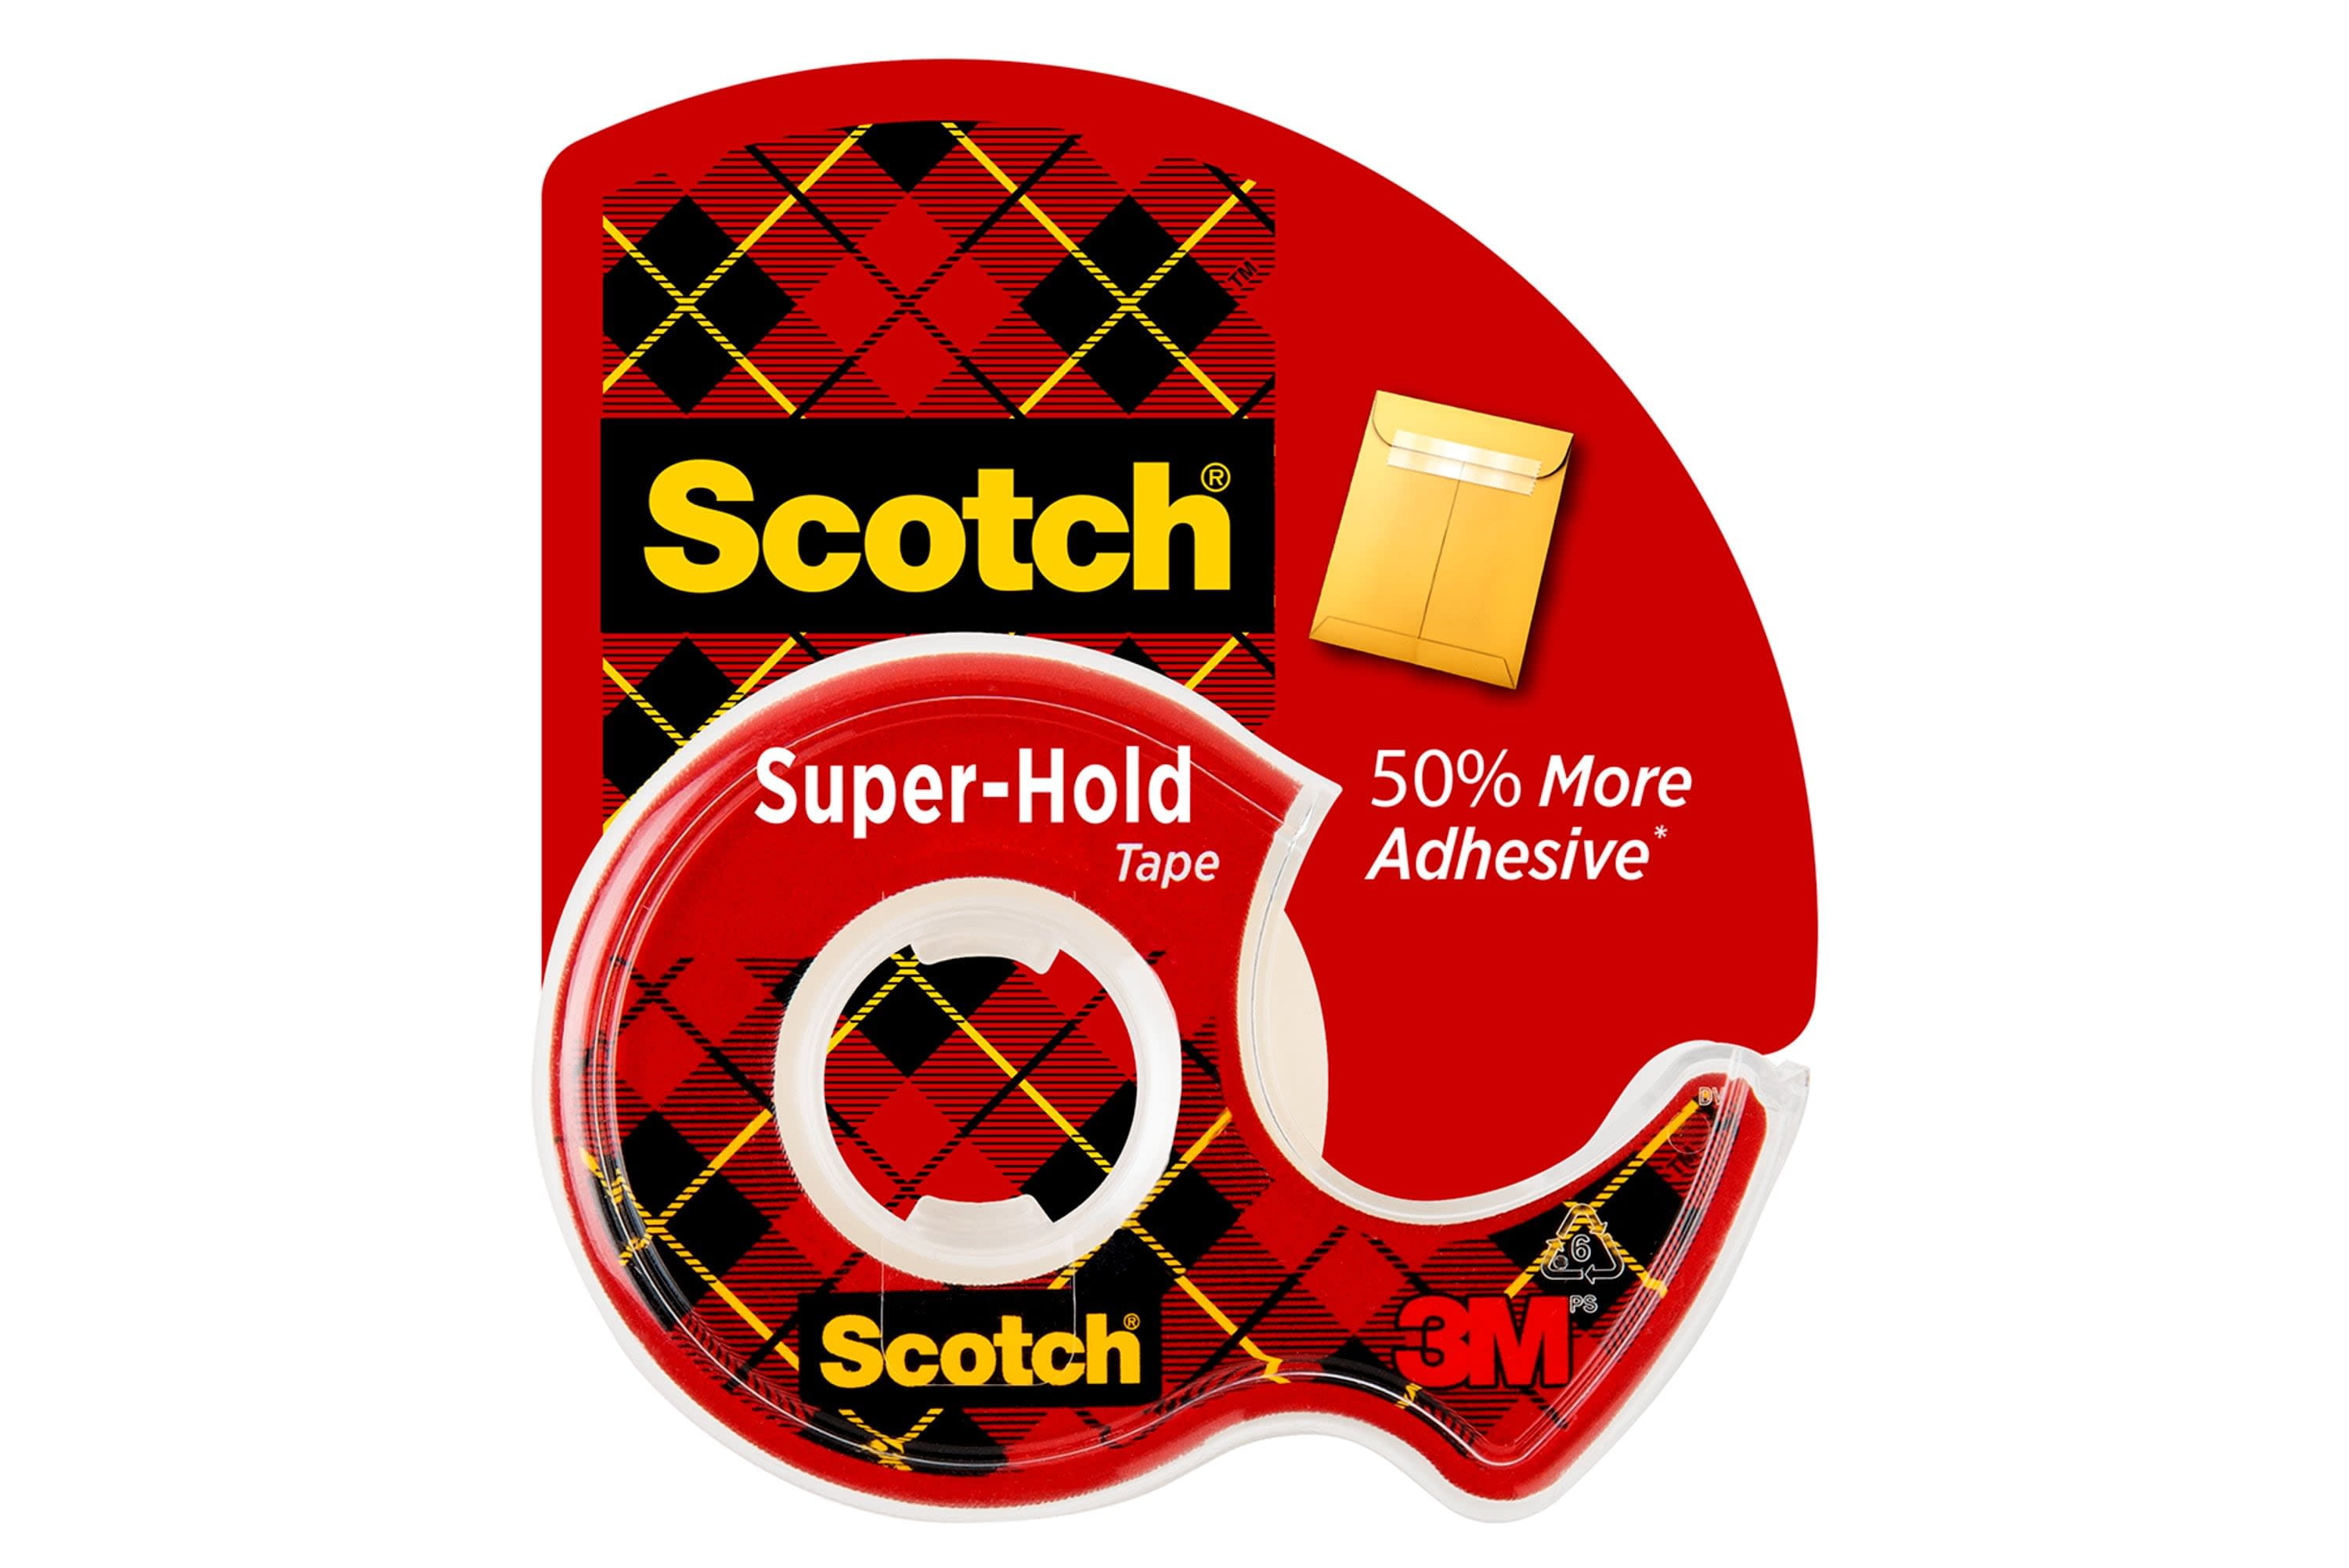 Transparent Finish Trusted Favorite 4198 50% More Adhesive 3/4 x 650 Inches 4 Rolls - 1 Scotch Super-Hold Tape Dispensered 